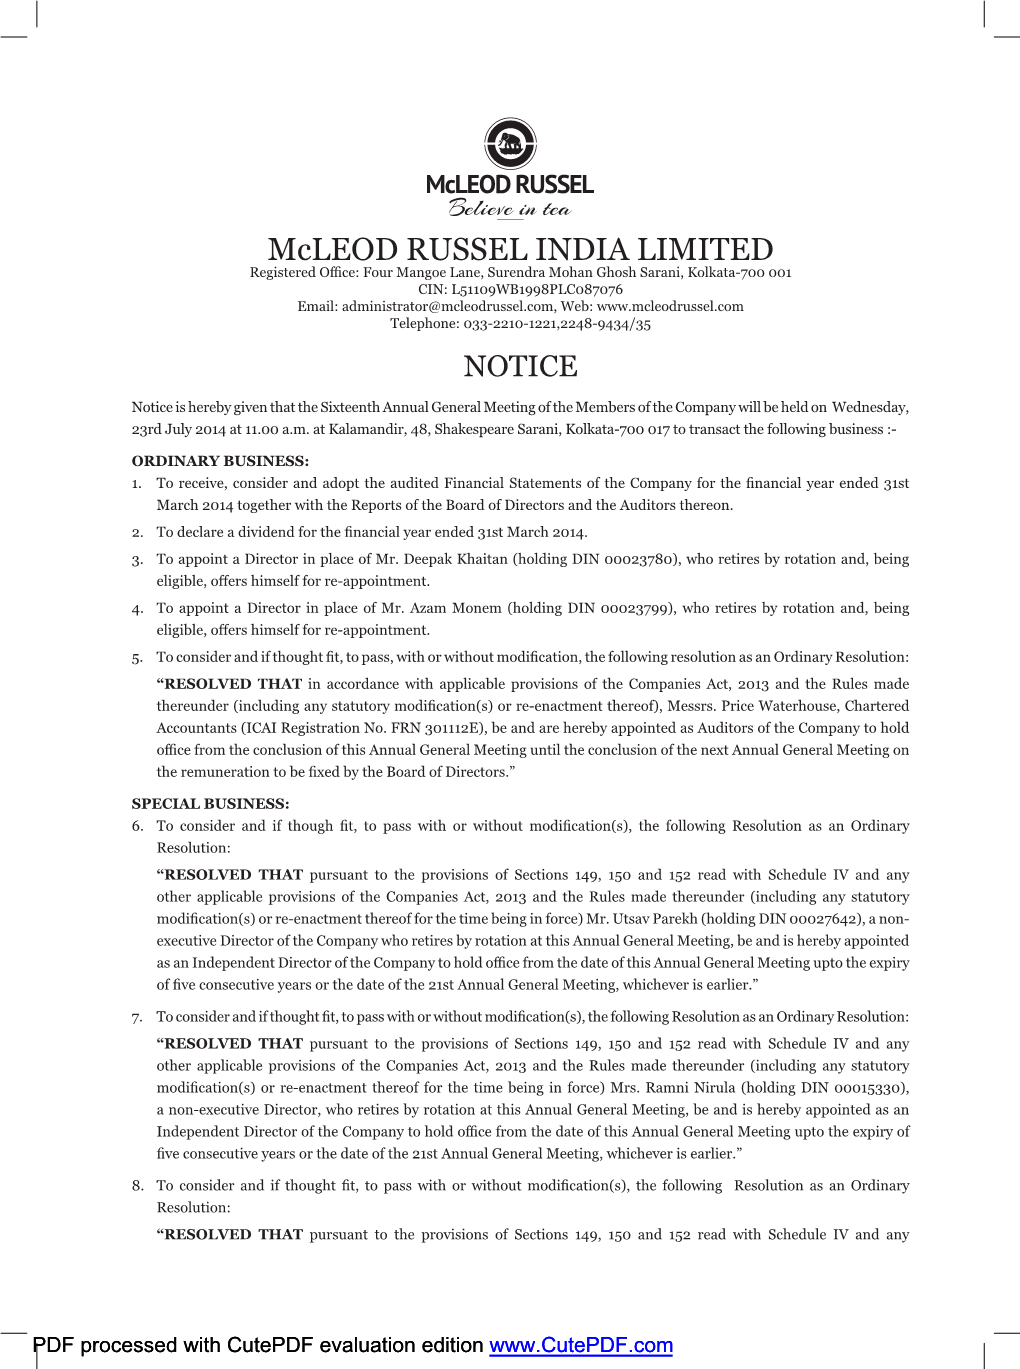 Mcleod RUSSEL INDIA LIMITED